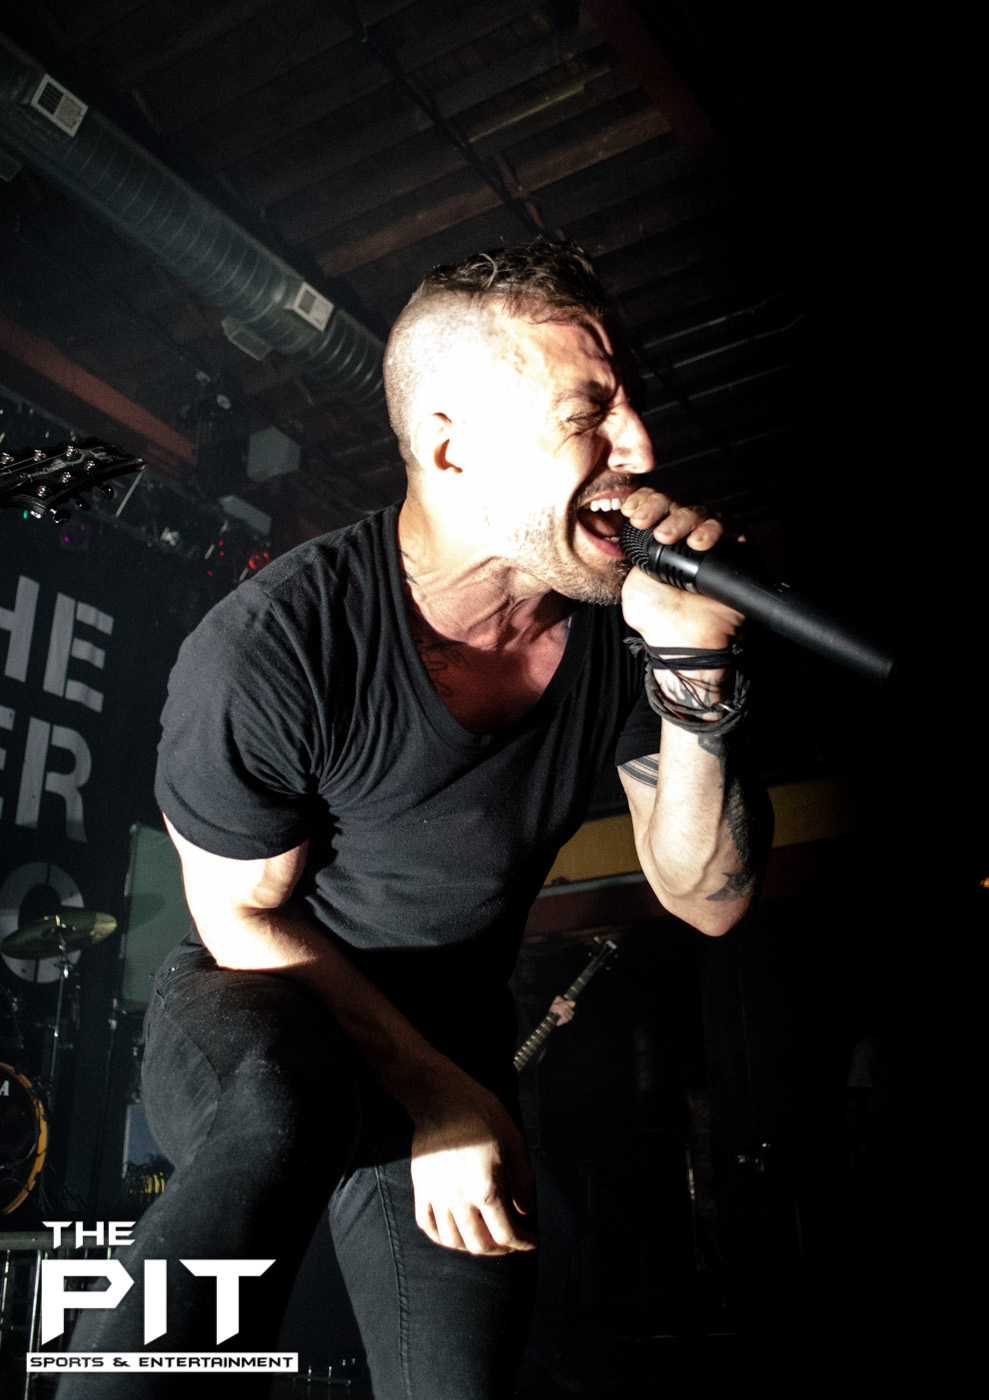 The Dillinger Escape Plan performs with guests with Trash Talk, Retox and Shining at The Crofoot Ballroom in Pontiac, MI on April 10, 2014. Photo: Jamie Limbright / The Pit: SE